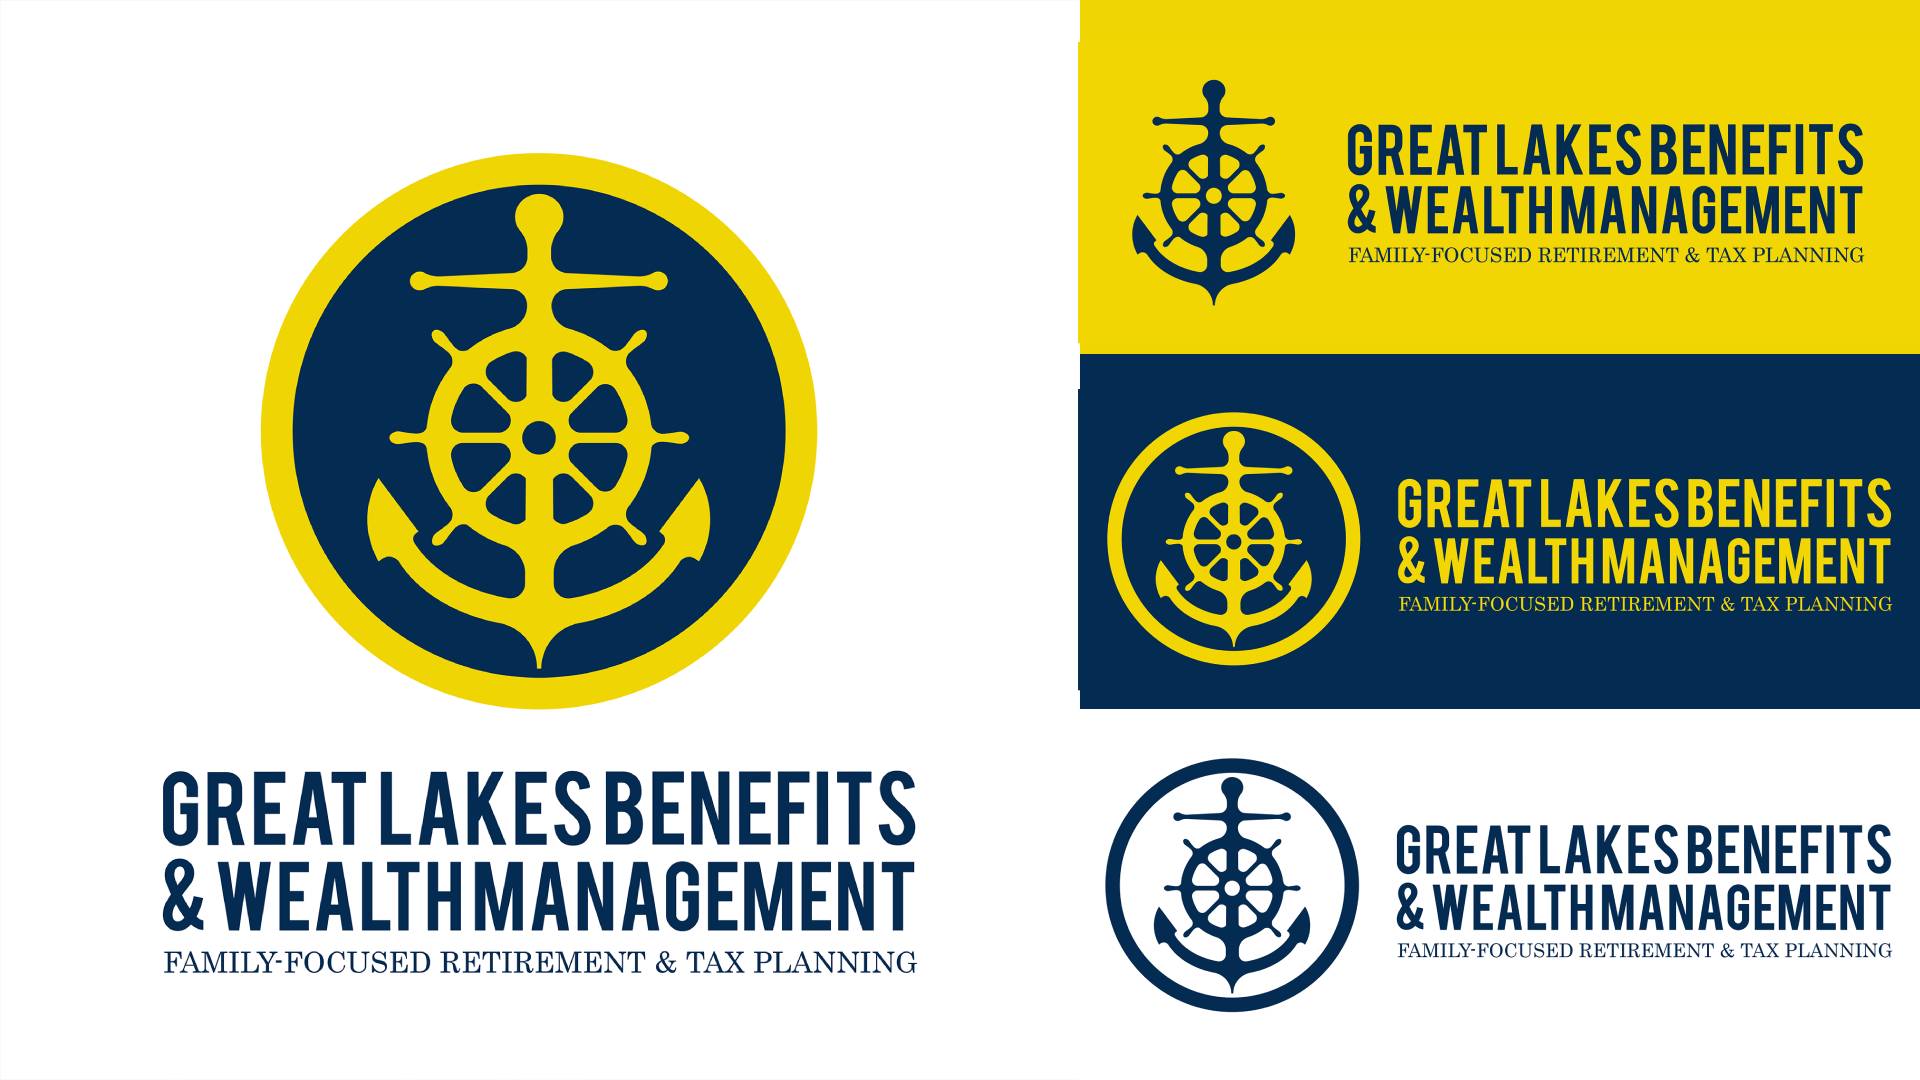 Great Lakes Benefits & Wealth Management Logo